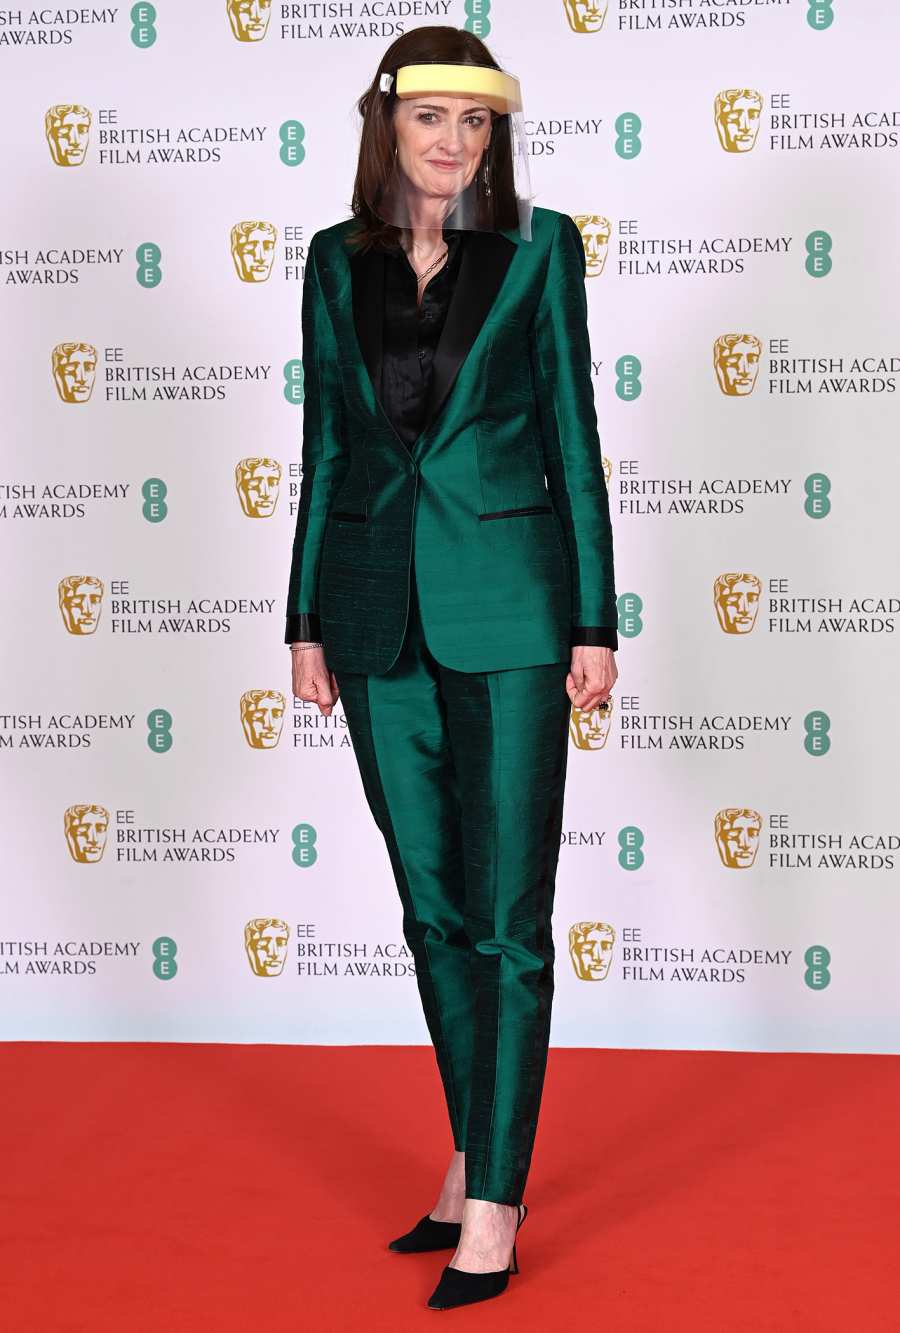 See What the Stars Wore on the 2021 BAFTA TV Awards Red Carpet